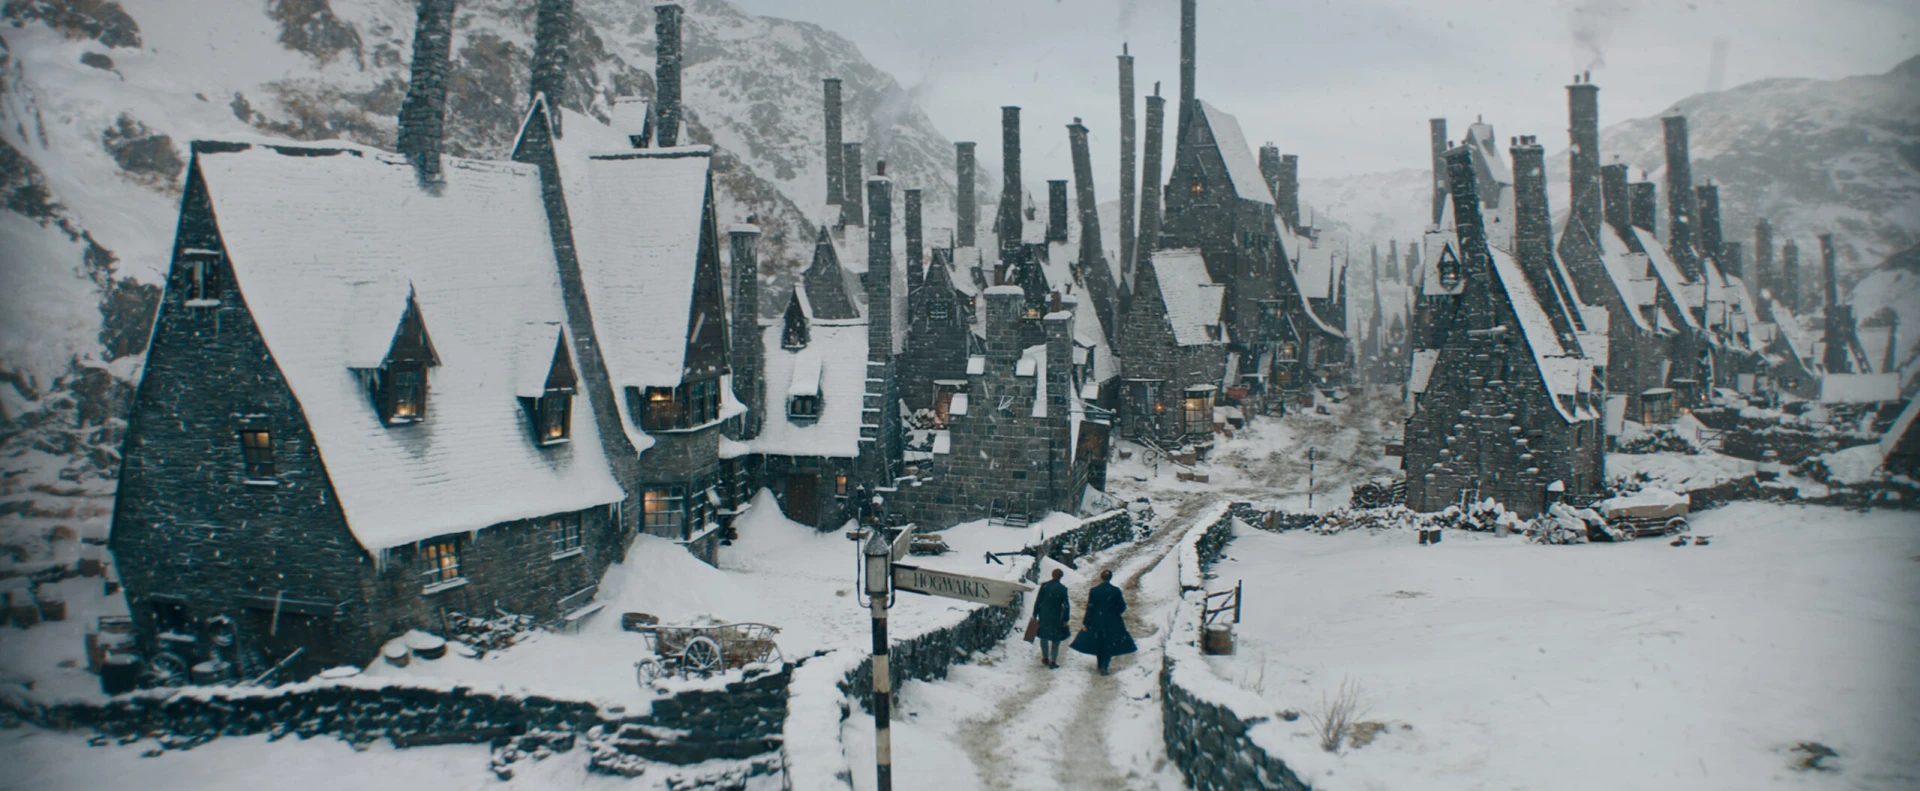 Fantastic Beasts: The Secrets of Dumbledore village in snow view Raynault vfx